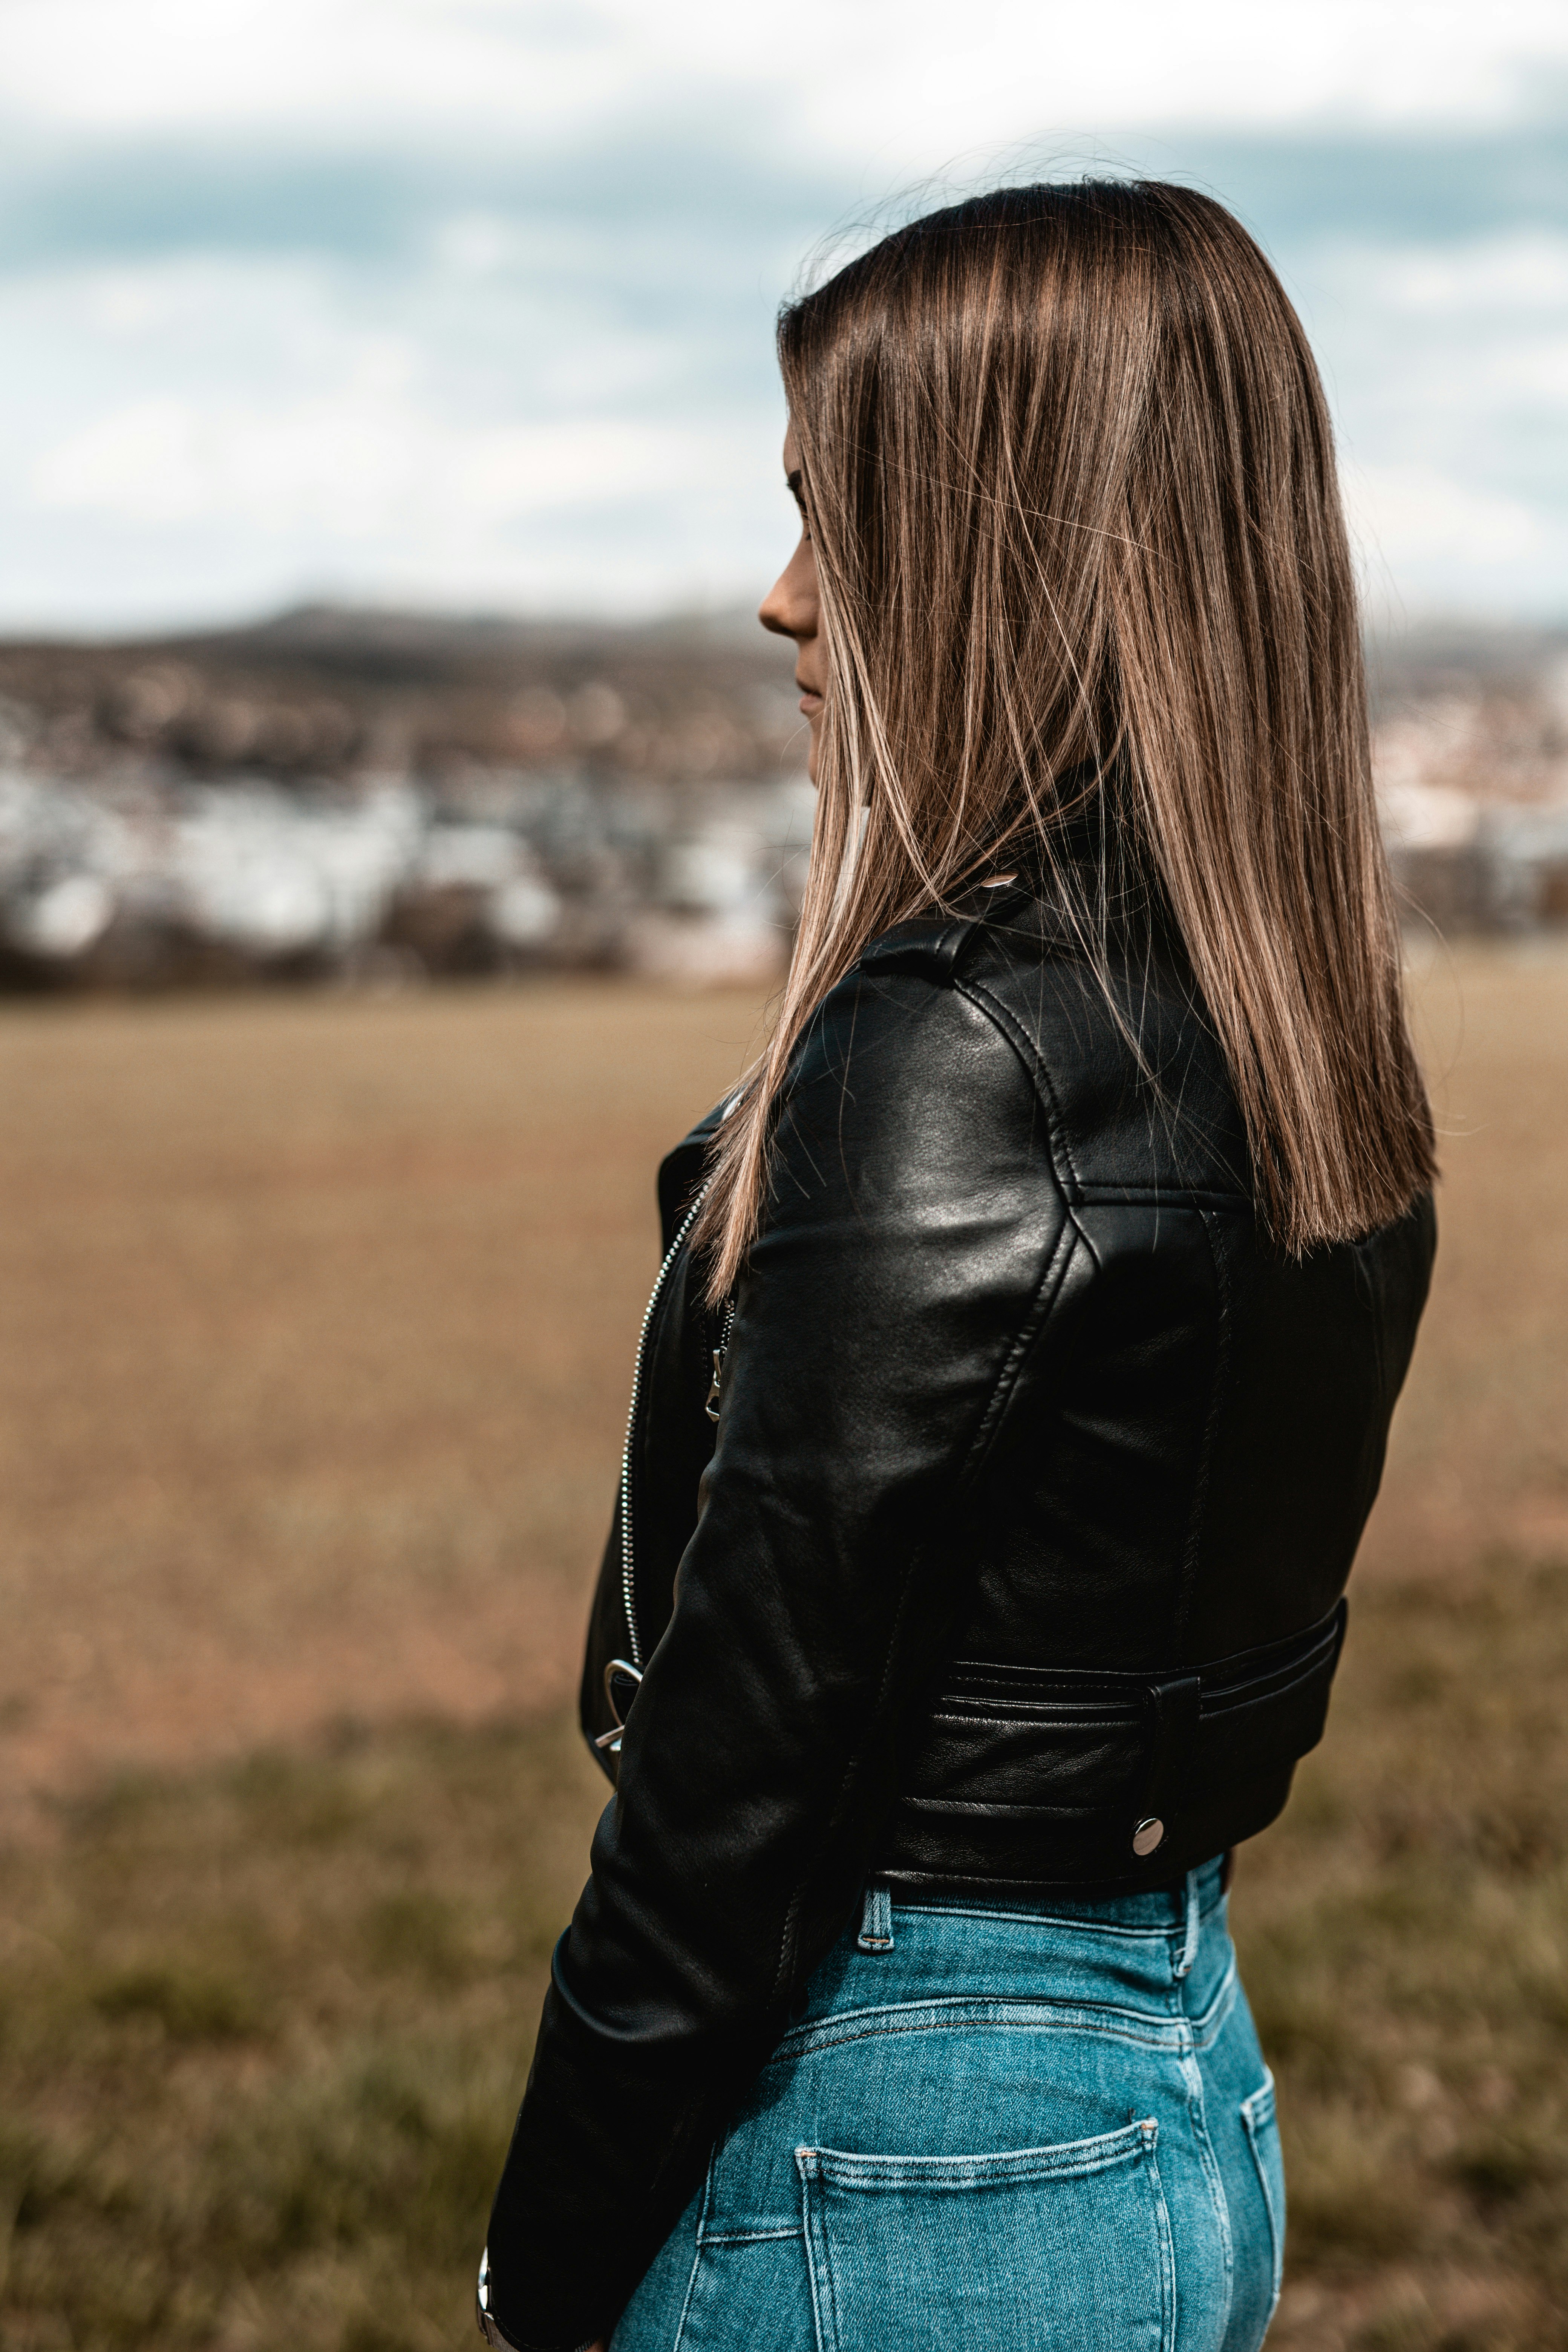 woman in black leather jacket standing on green grass field during daytime